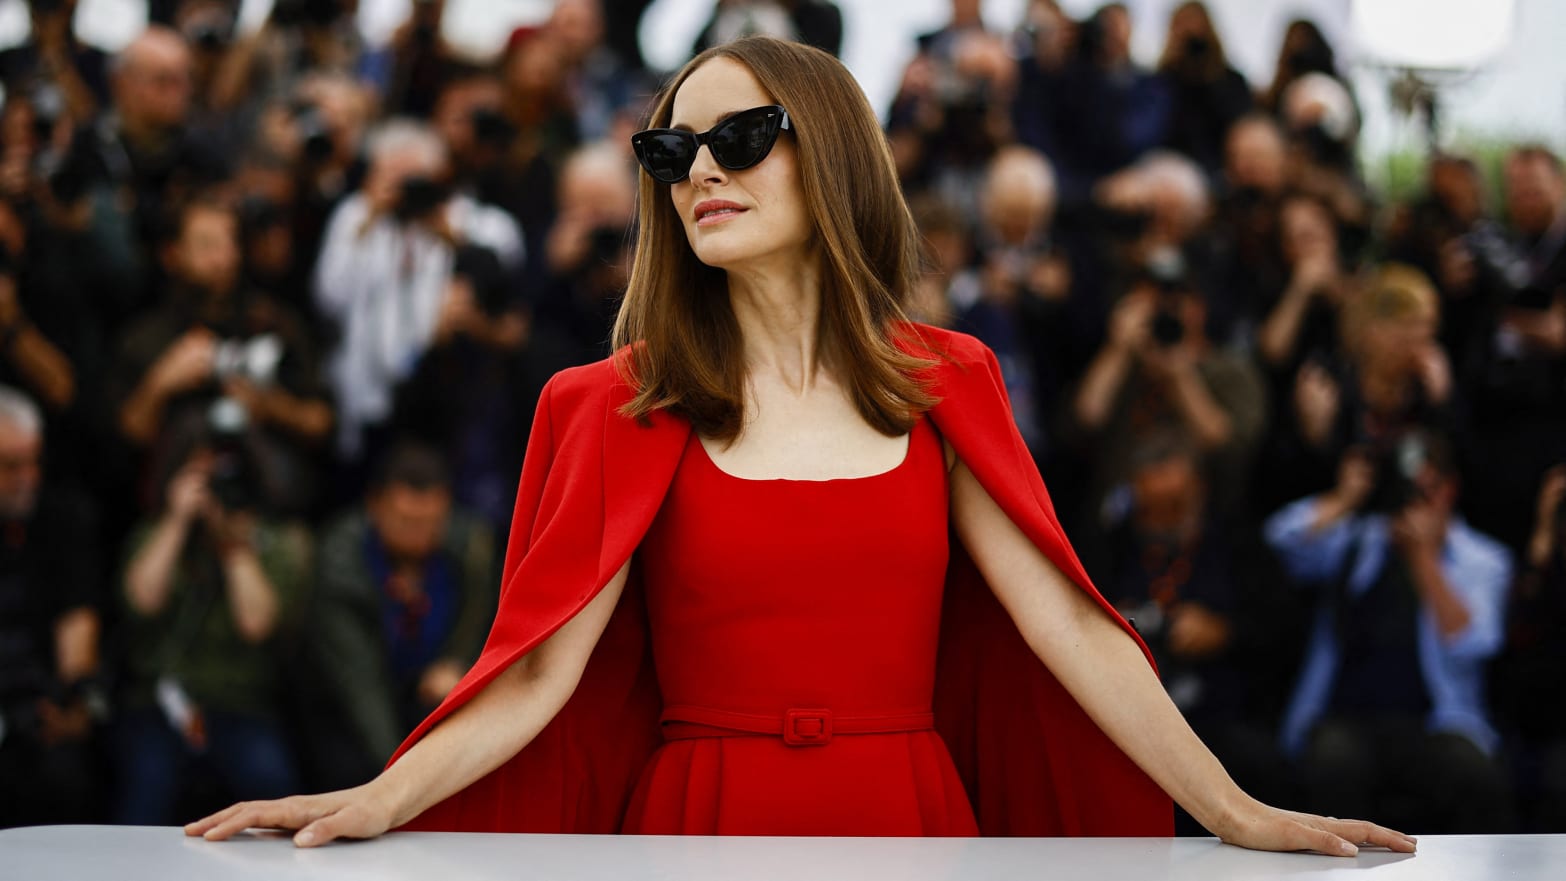 Natalie Portman (and Dior) Won Cannes This Year